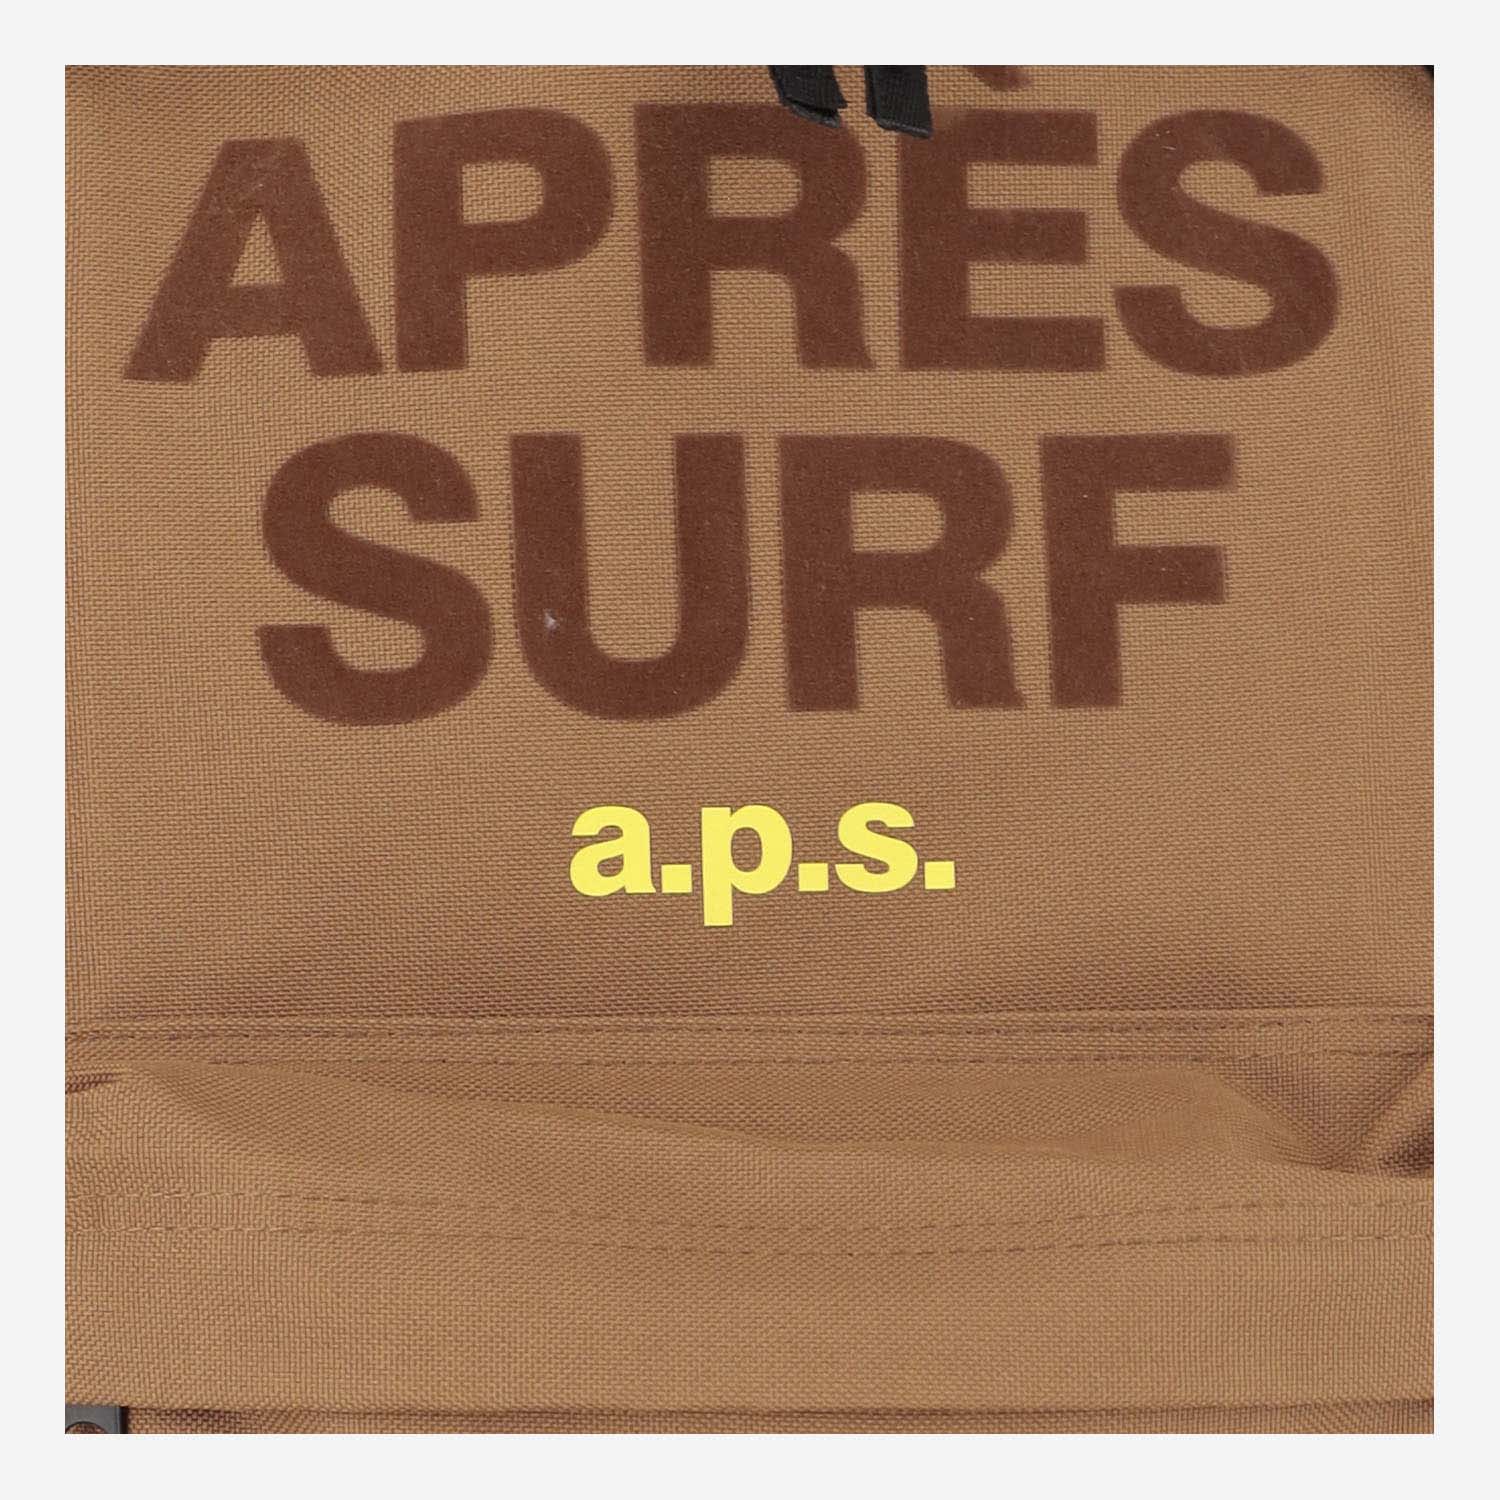 Shop Après Surf Technical Fabric Backpack With Logo In Brown